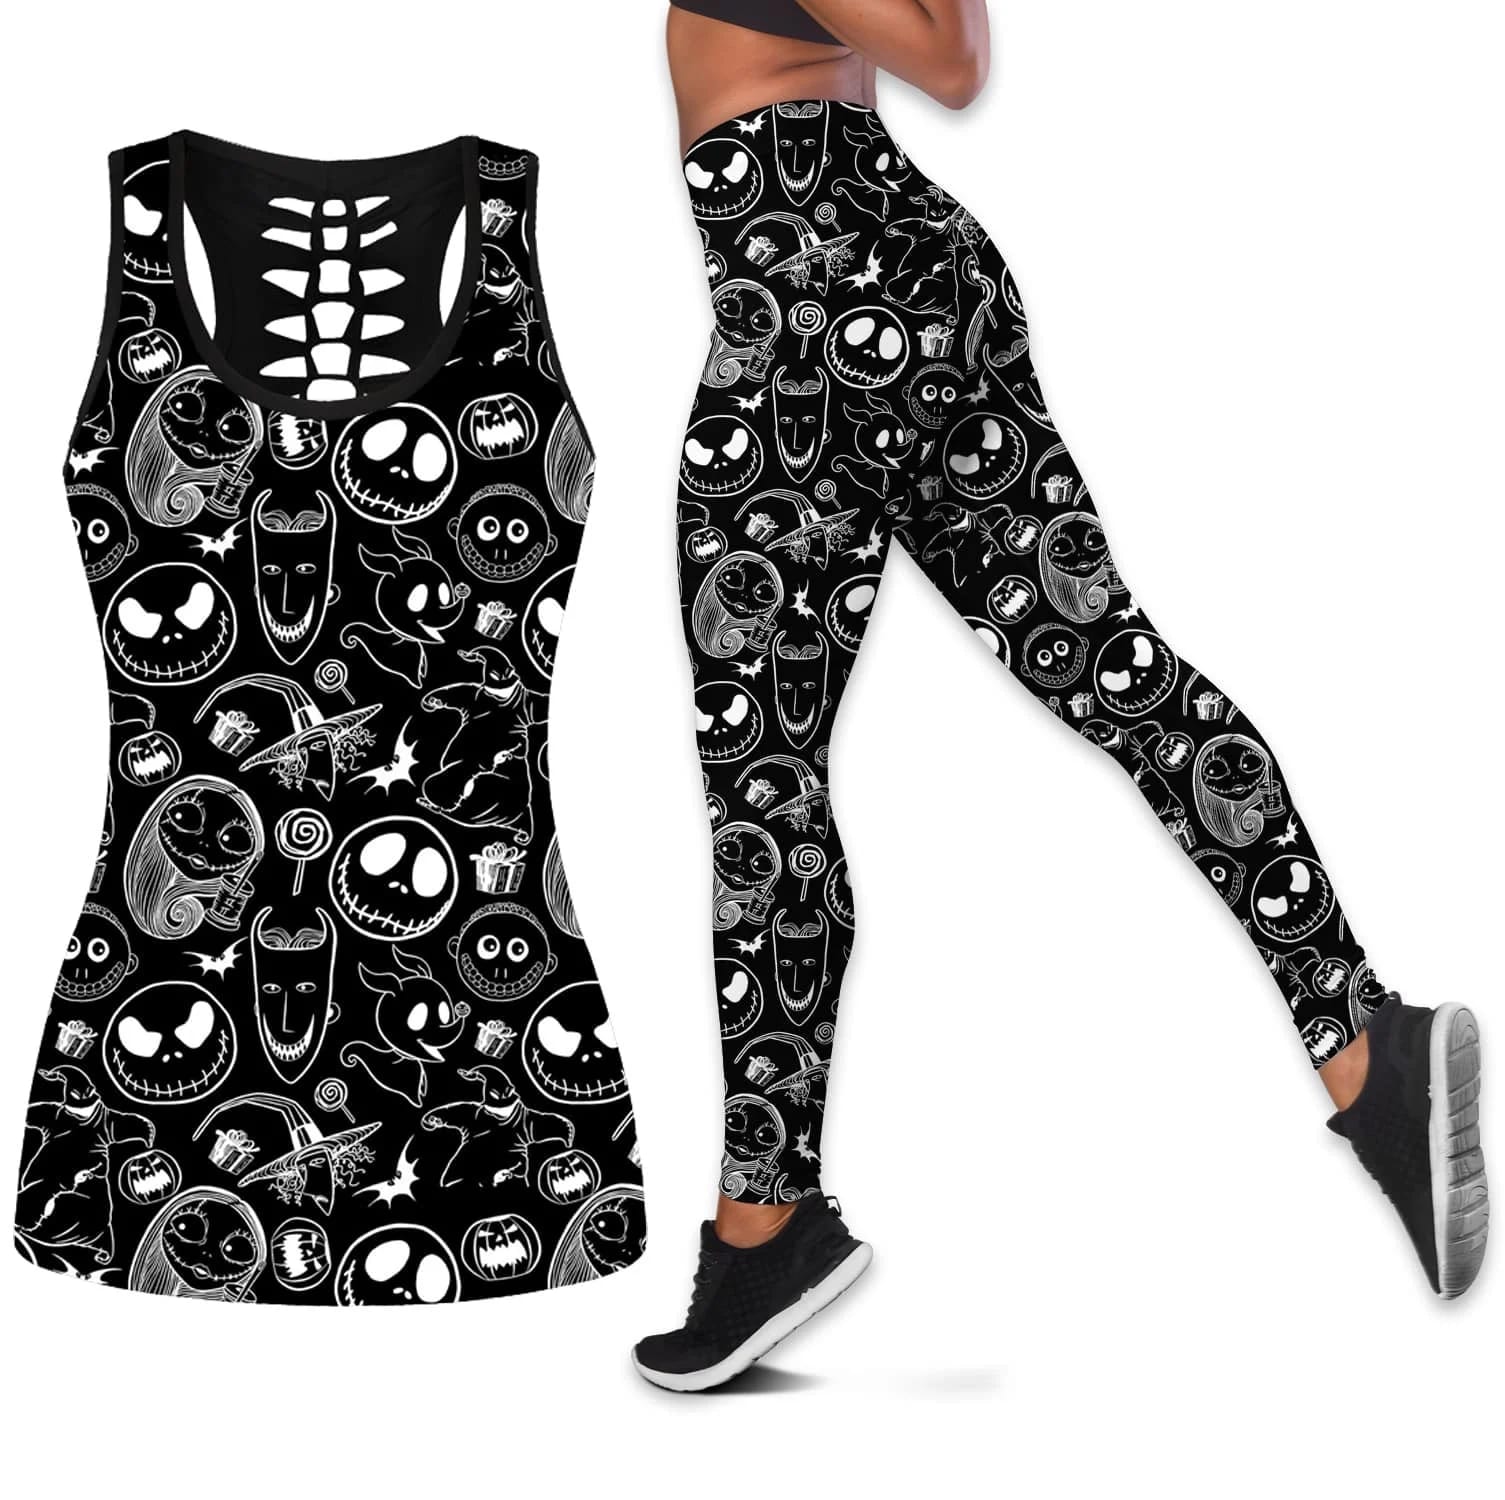 The Nightmare Before Christmas Characters Faces Women Tank Top Leggings Rtsctn